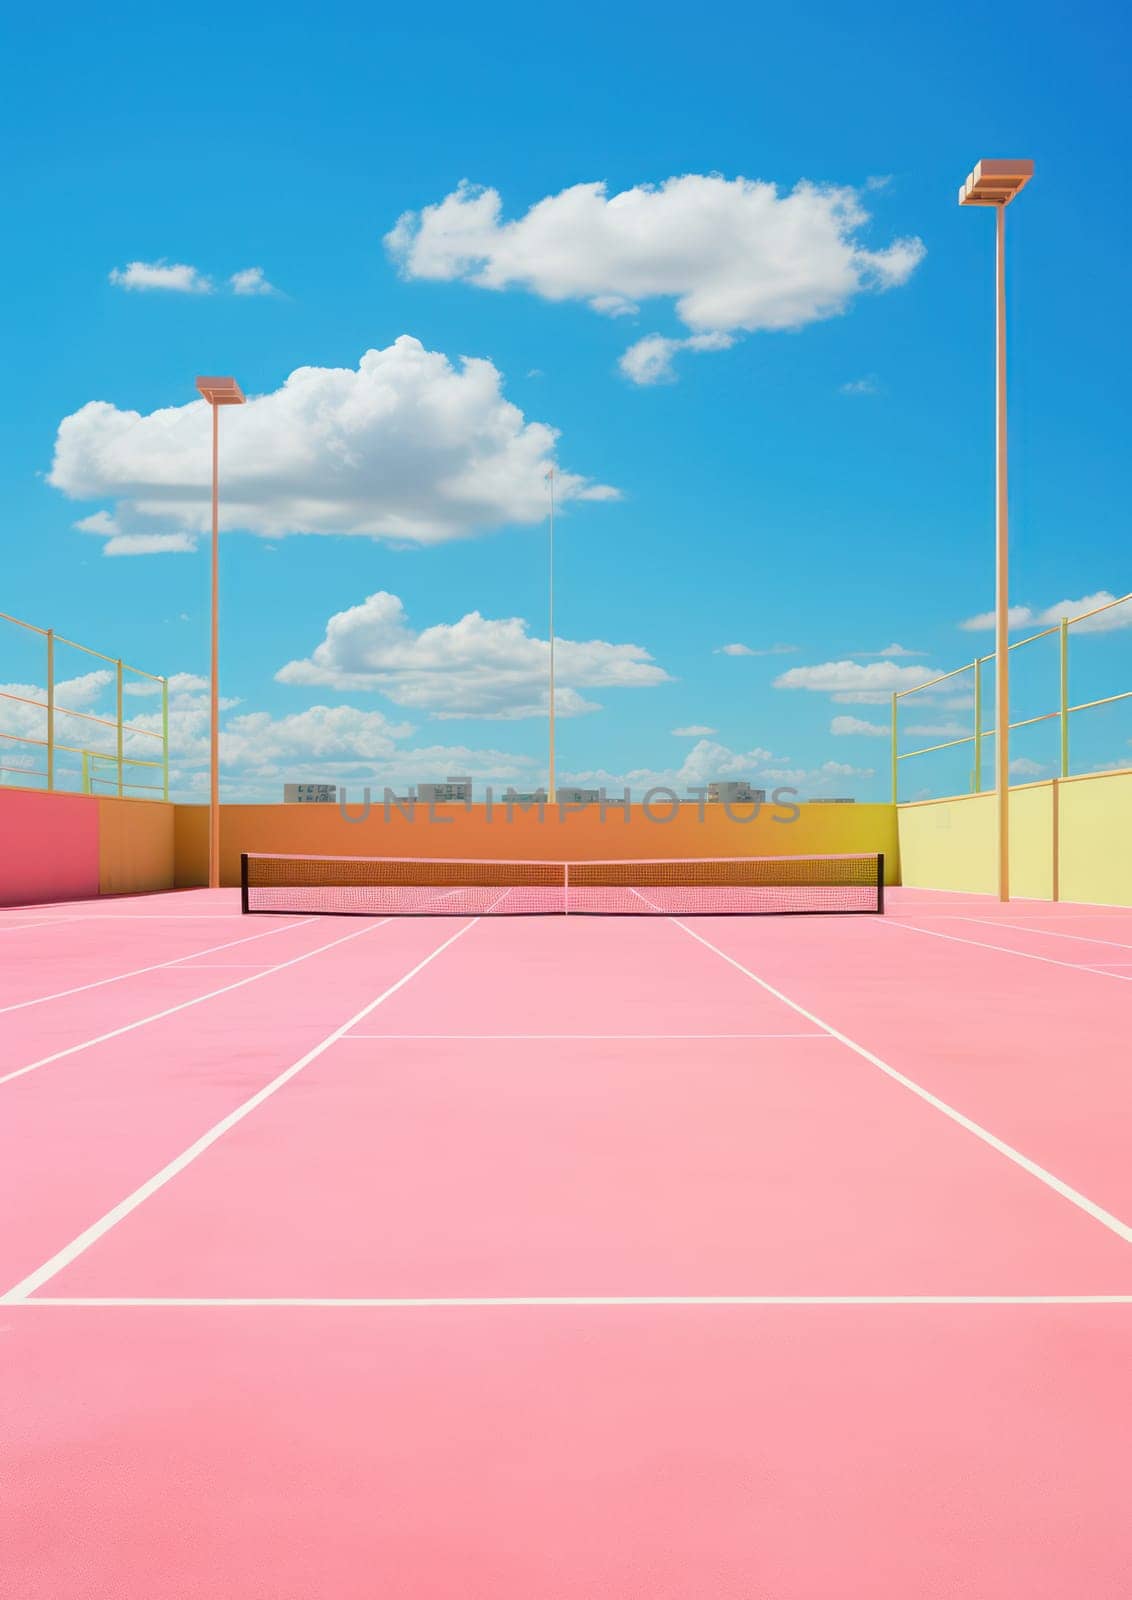 Active Fun on Green: Tennis Court Competition in a Summer Stadium by Vichizh